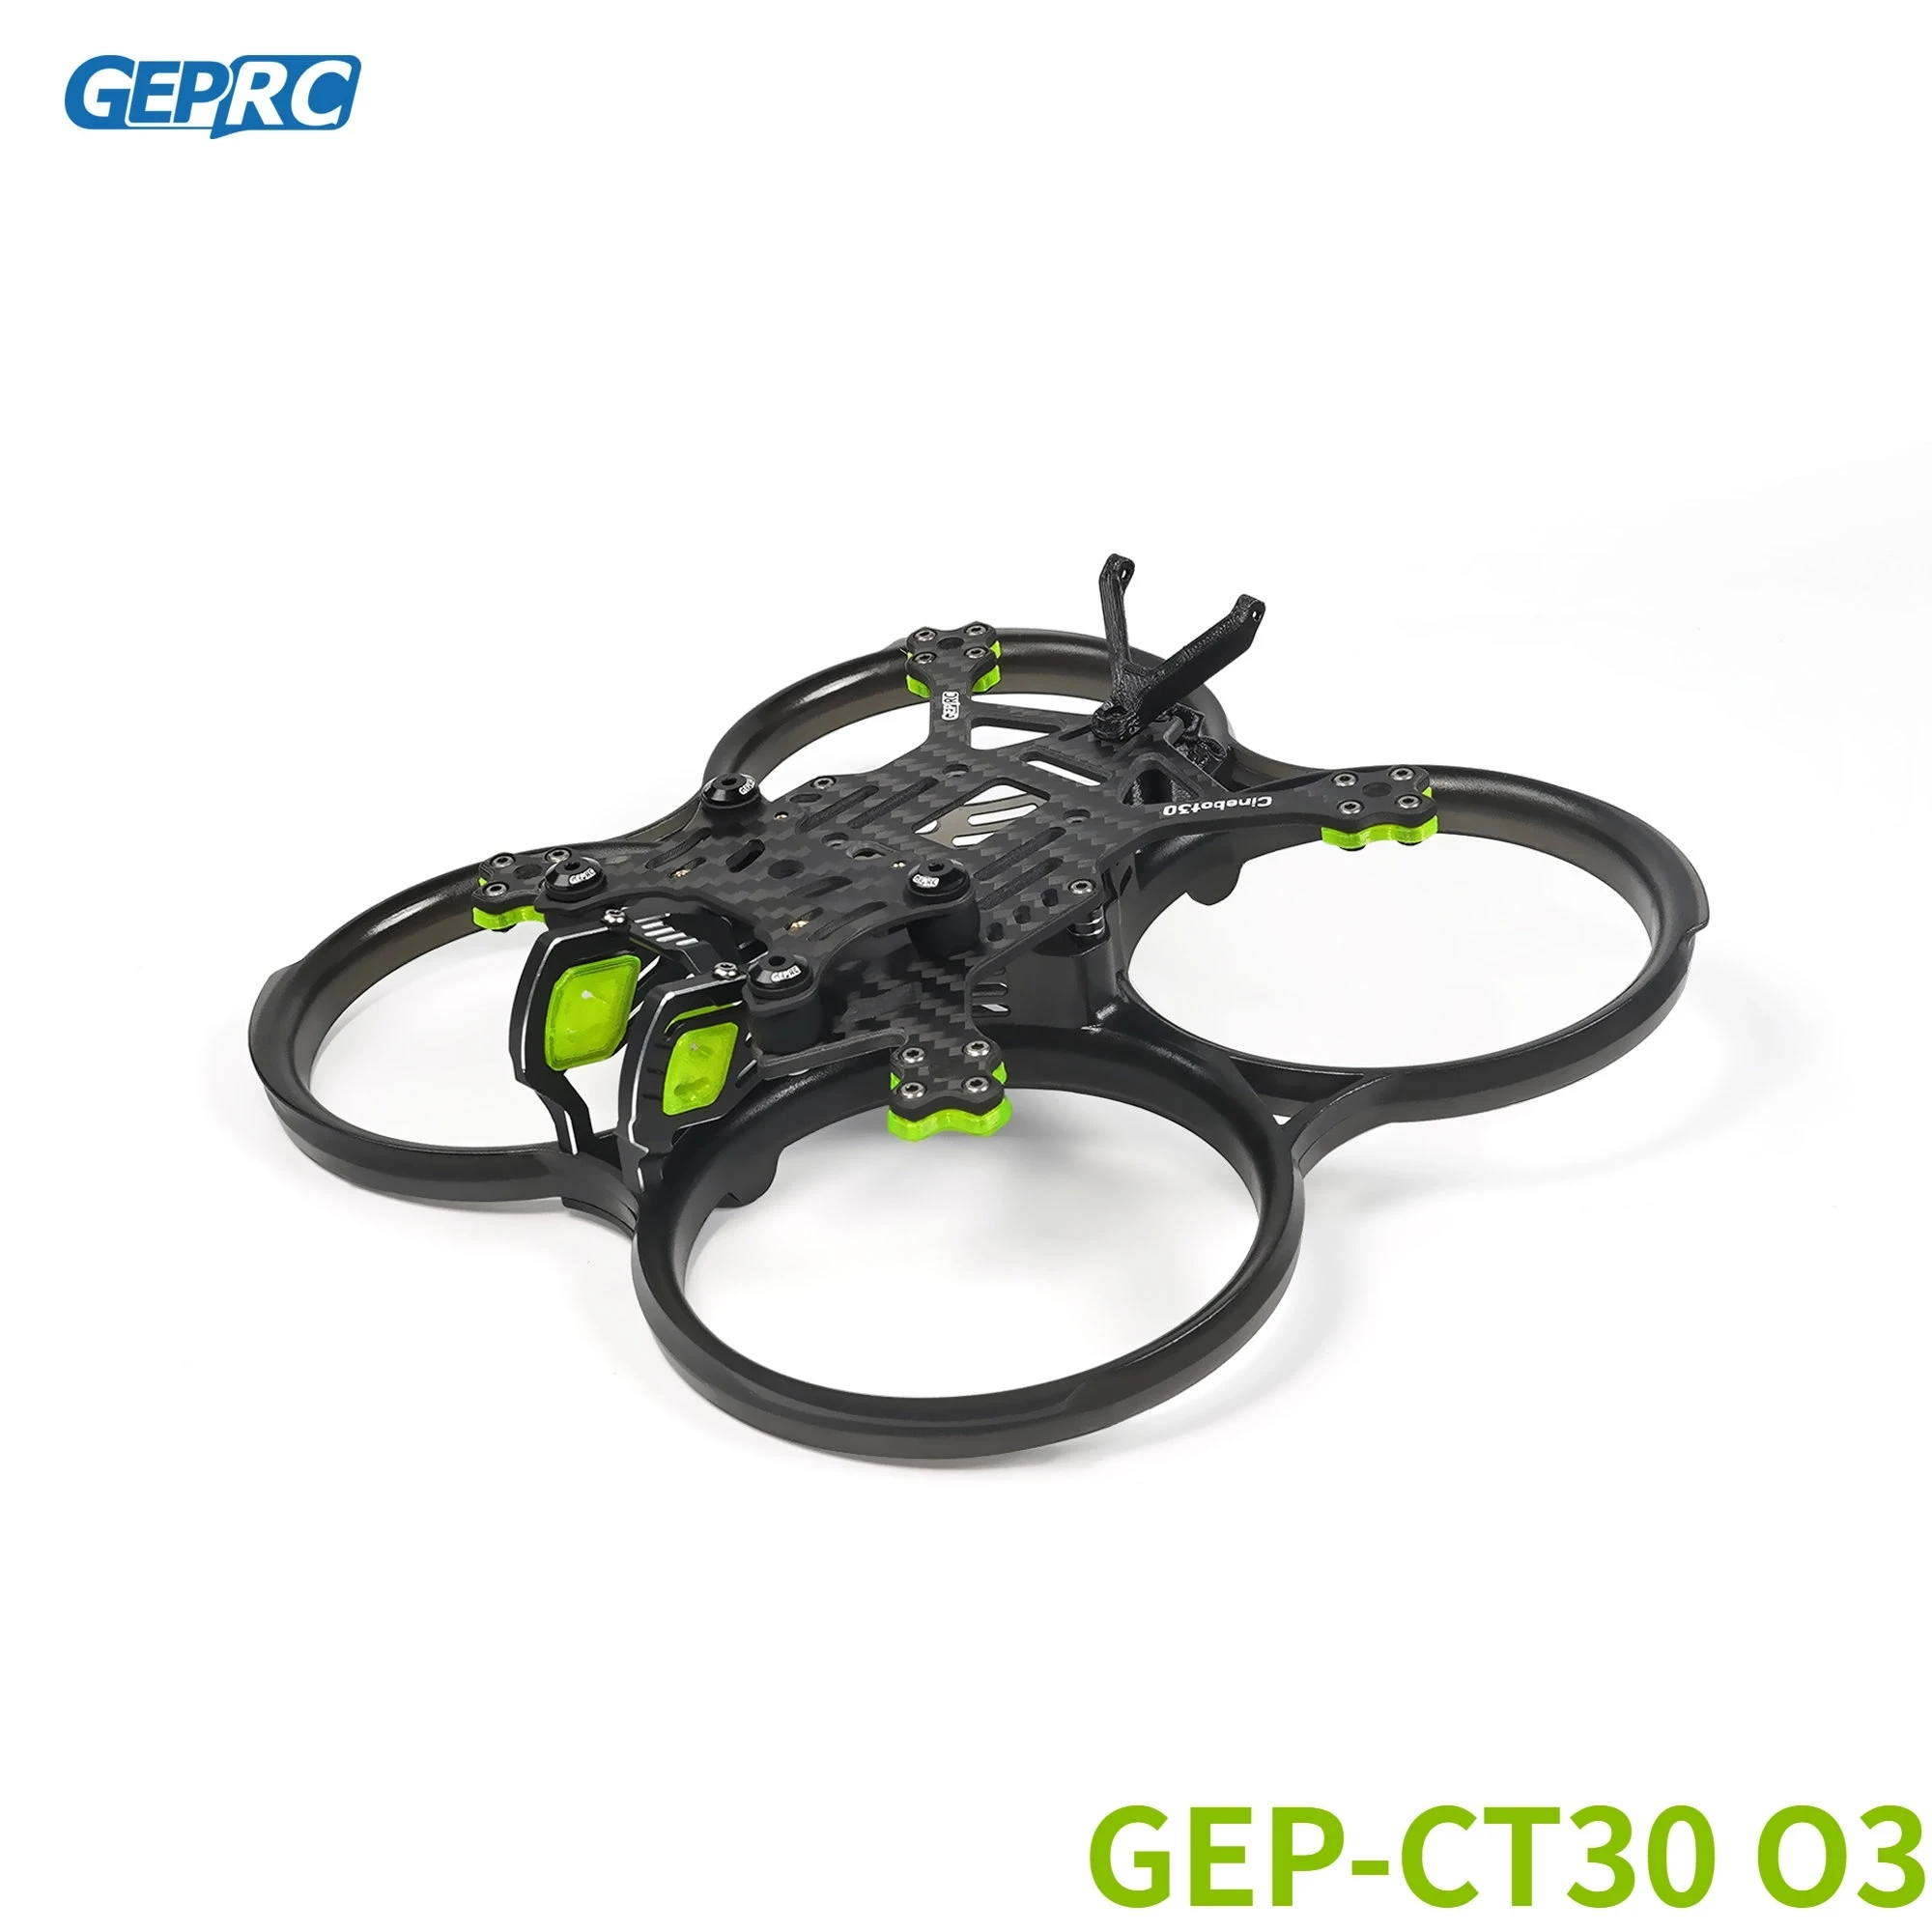 

GEPRC GEP-CT30 O3 Frame Parts 3inch Propeller Accessory Base Quadcopter Frame FPV Freestyle RC Racing Drone Cinebot30